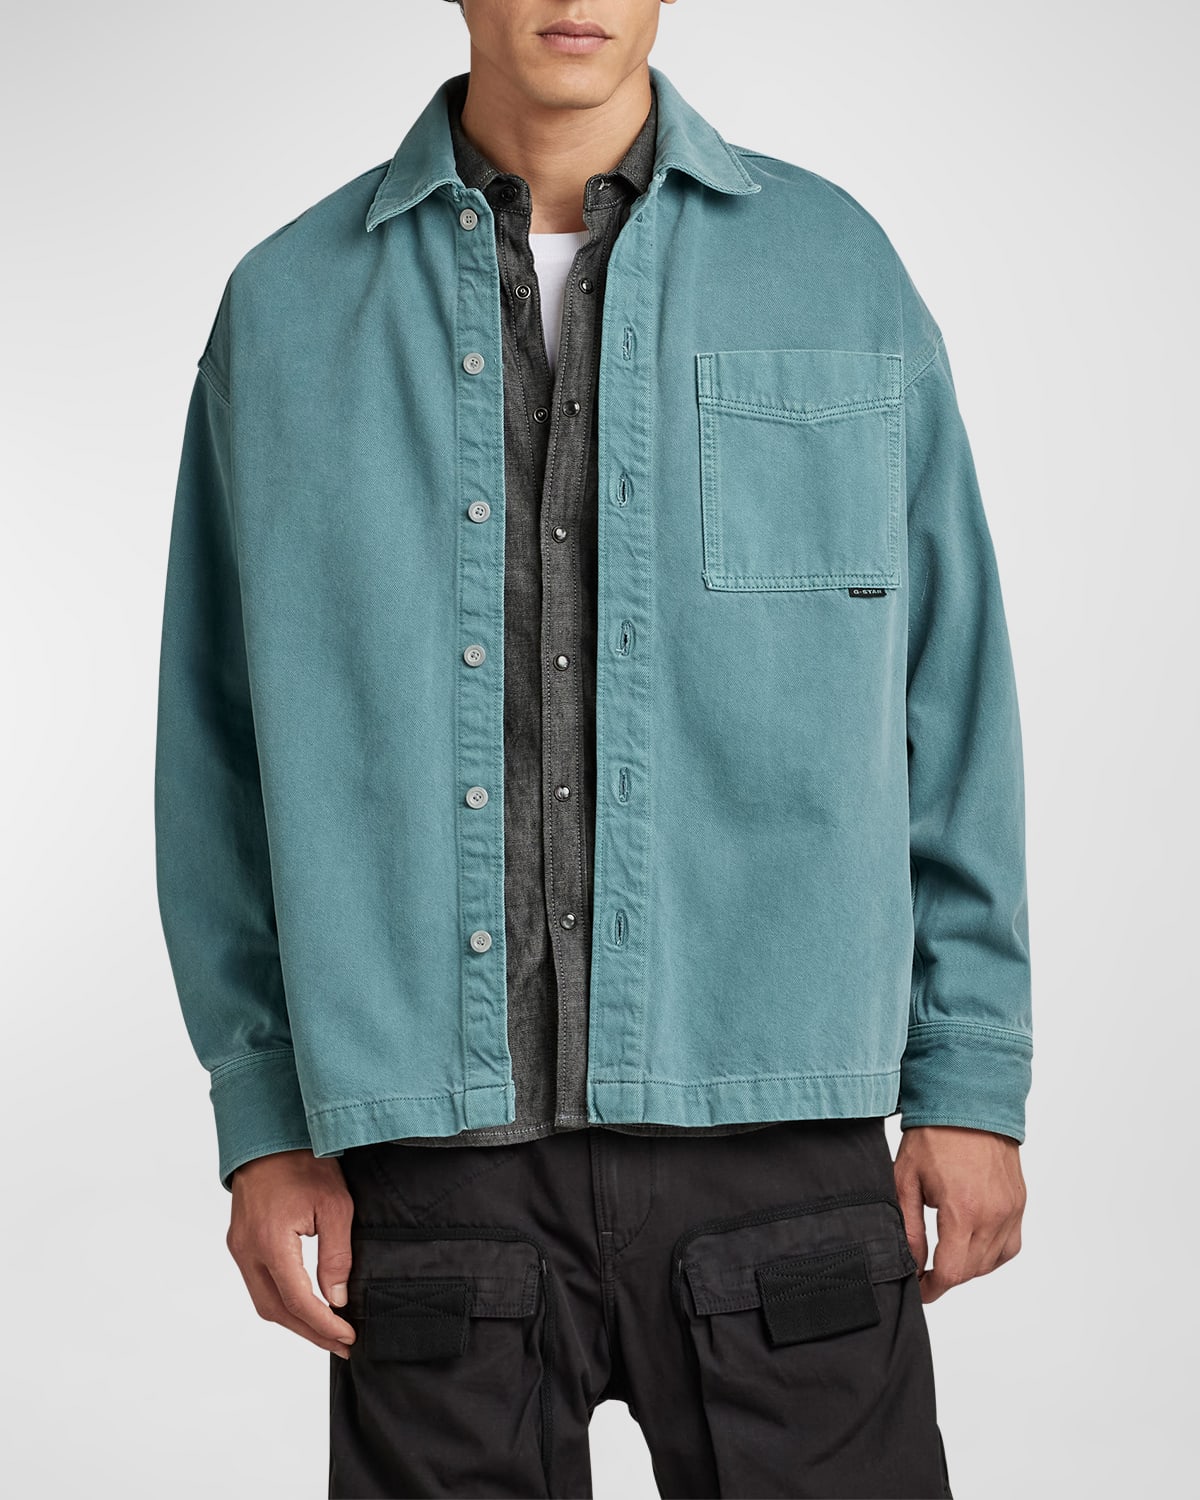 G-STAR RAW Men's Boxy Garment-Dyed Button-Front Shirt